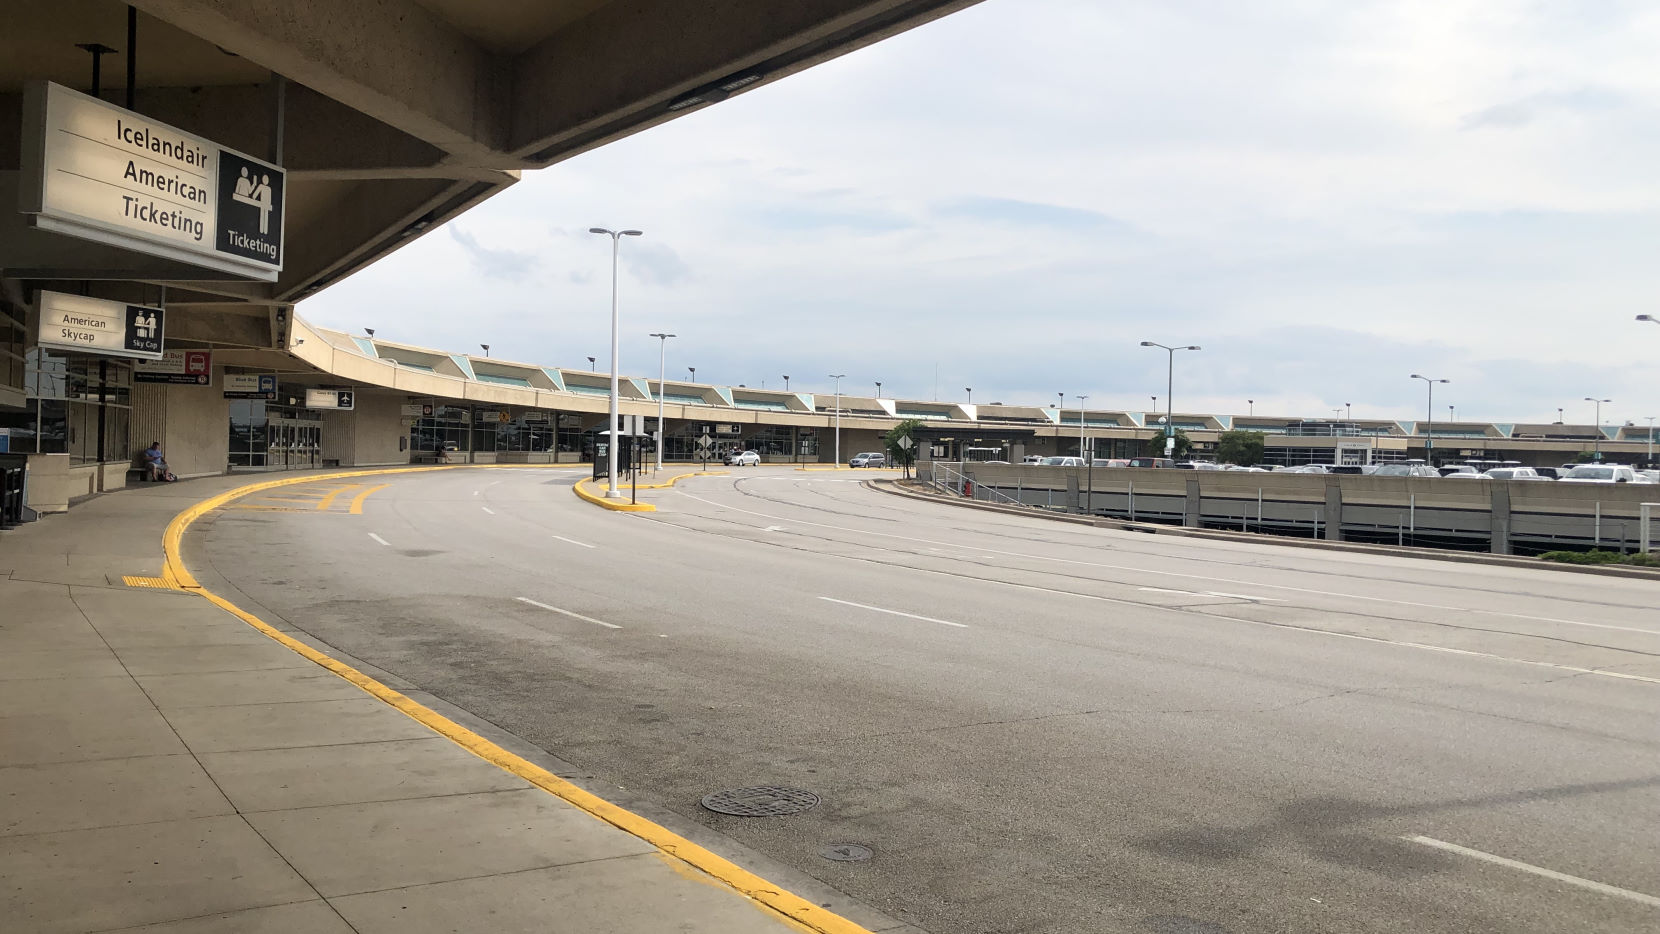 Terminal C departures loop at MCI. The roof beams from the previous photo extend out into the awning over the roadway, and wherever two beams intersect at the end of an awning, a small notch is cut out.